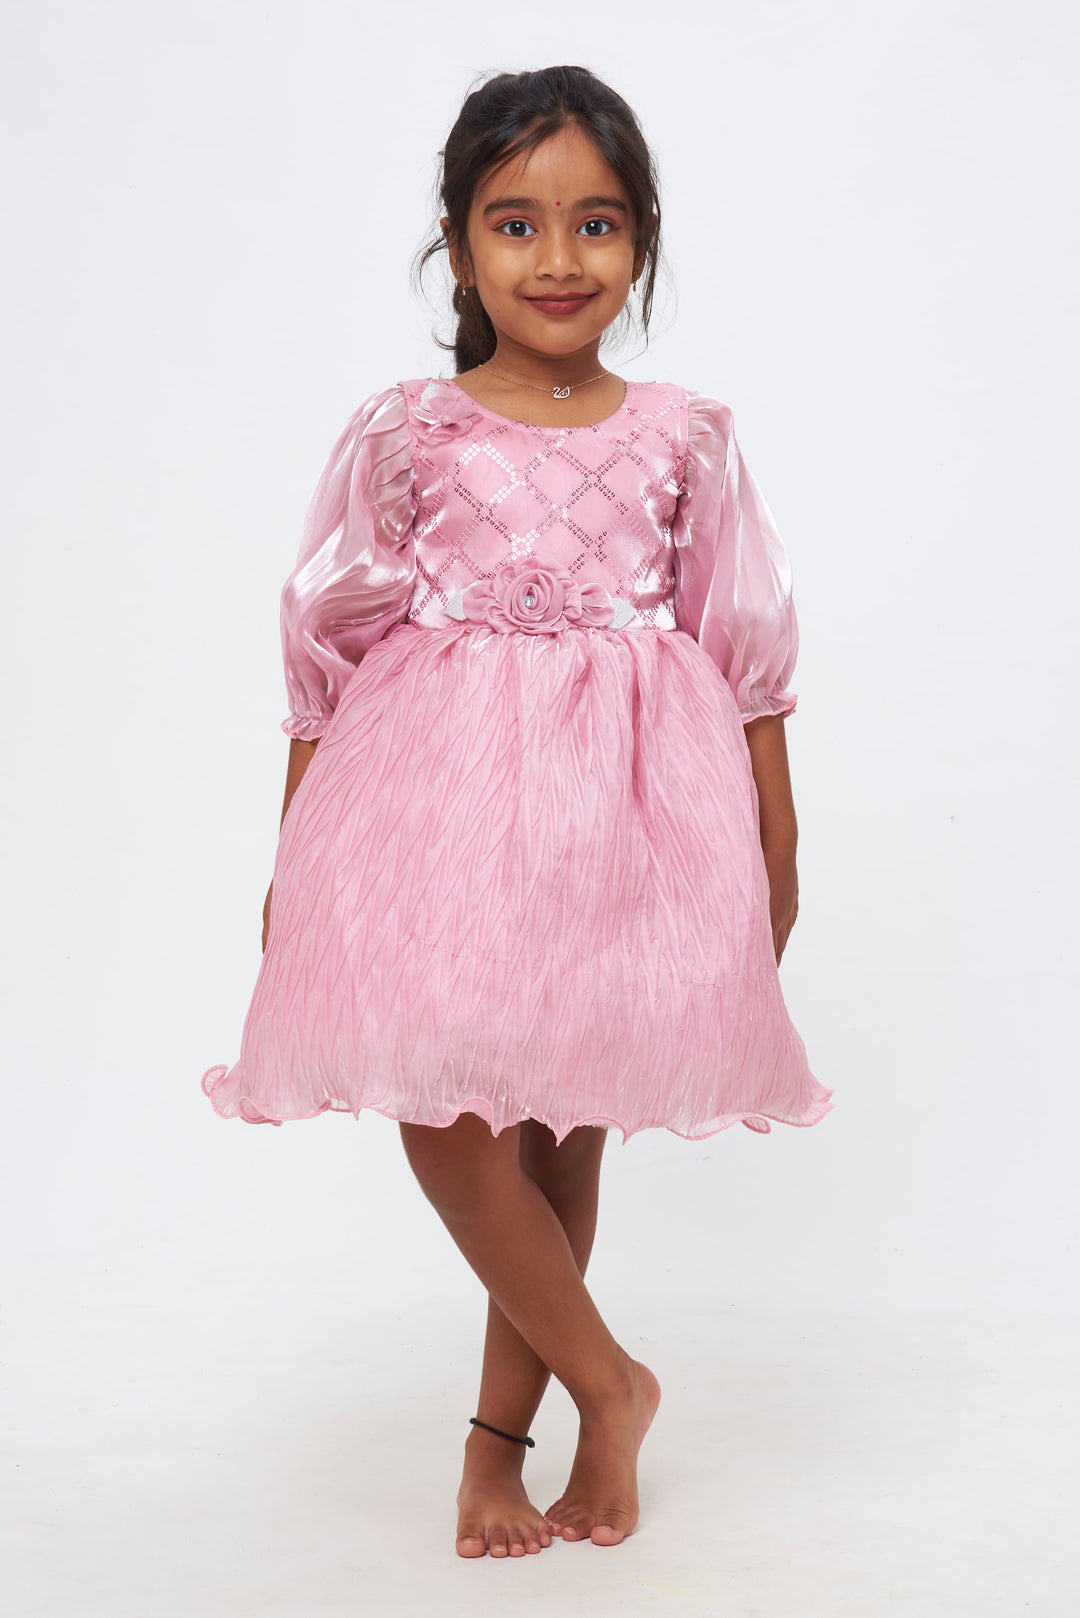 The Nesavu Girls Fancy Party Frock Purple Dreams: Girls Enchanting Lilac Dress with Floral Embellishments Nesavu 16 (1Y) / Purple / Satin Organza PF158A-16 Celebrate in Style | Exquisite Party Frocks for Young Divas | The Nesavu